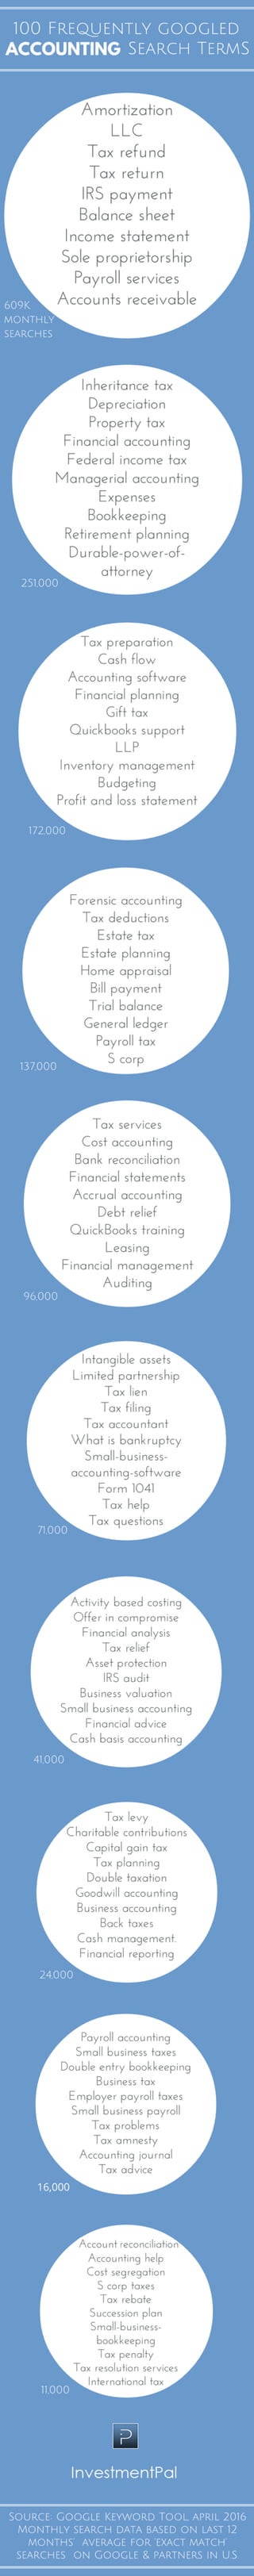 Part 4: 100 frequently Googled accounting topics & terms (Infographic)